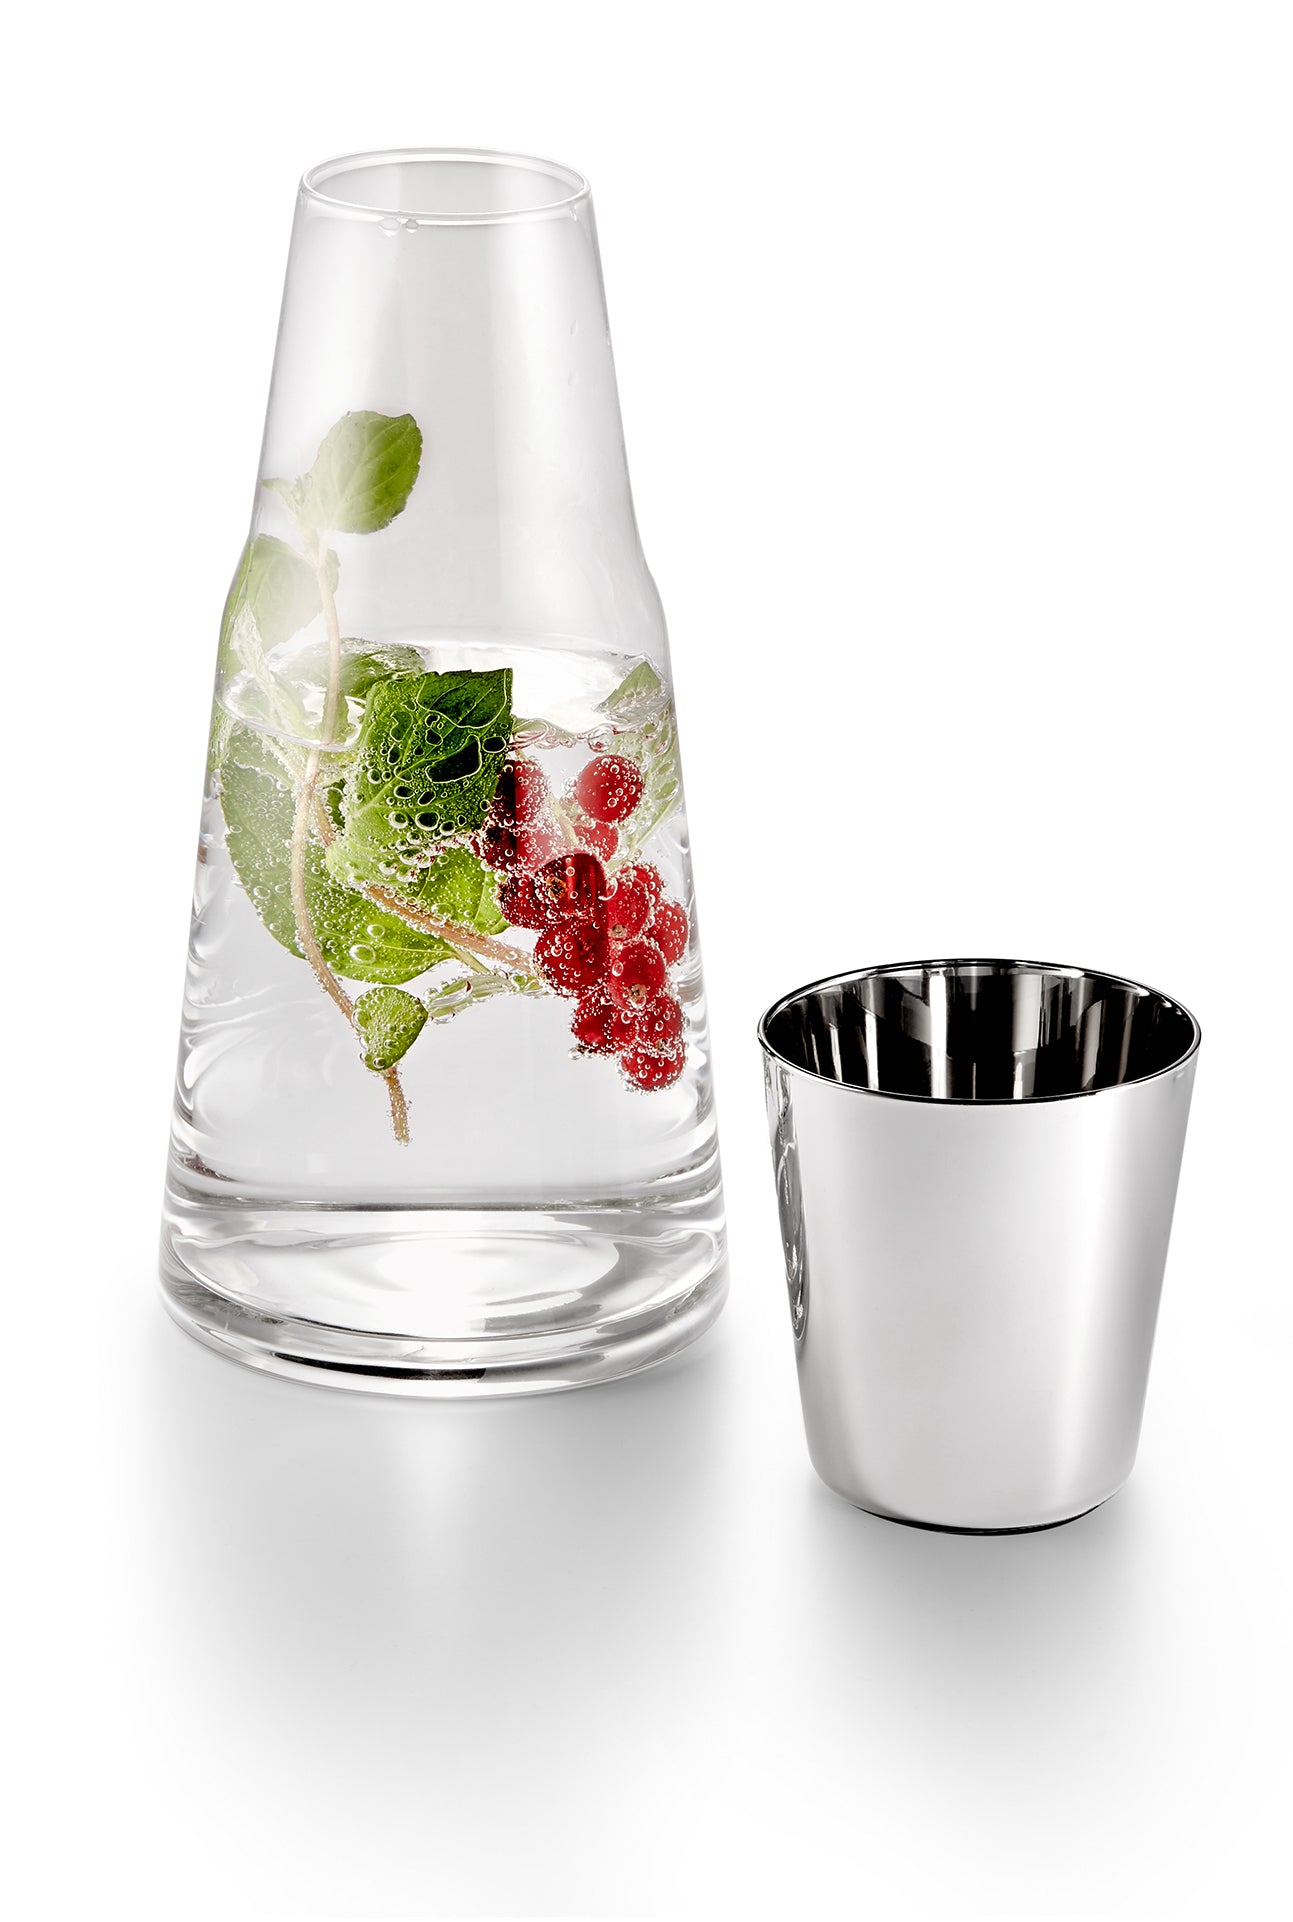 H2O pitcher with drinking glass